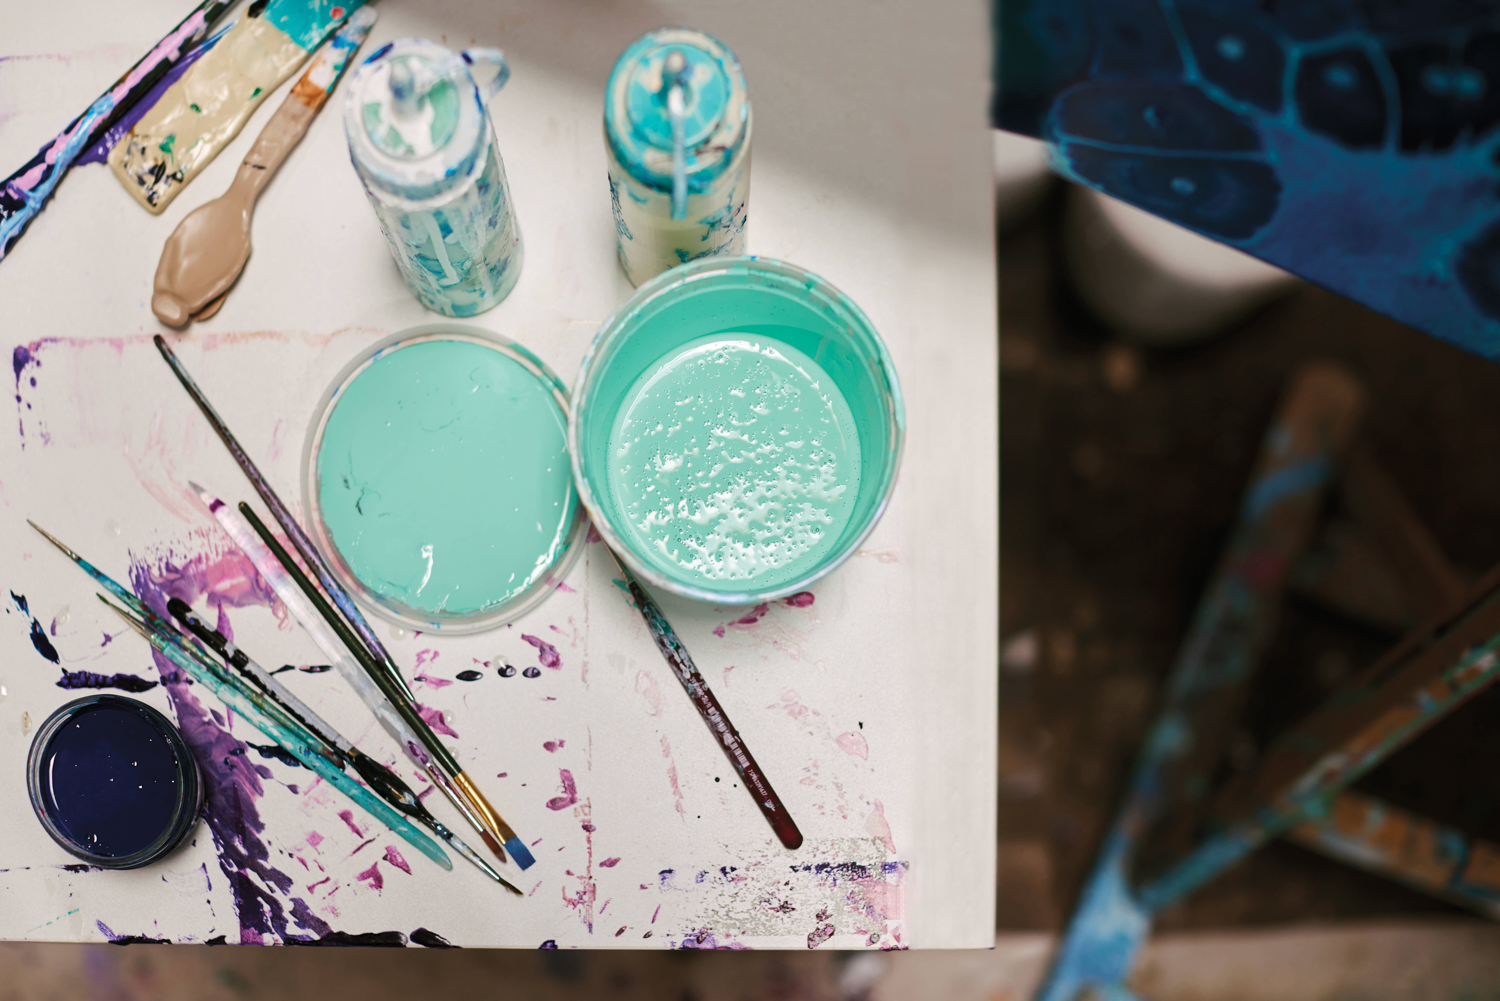 bucket of teal paint with lid off, set of small paint brushes and spray paint cans